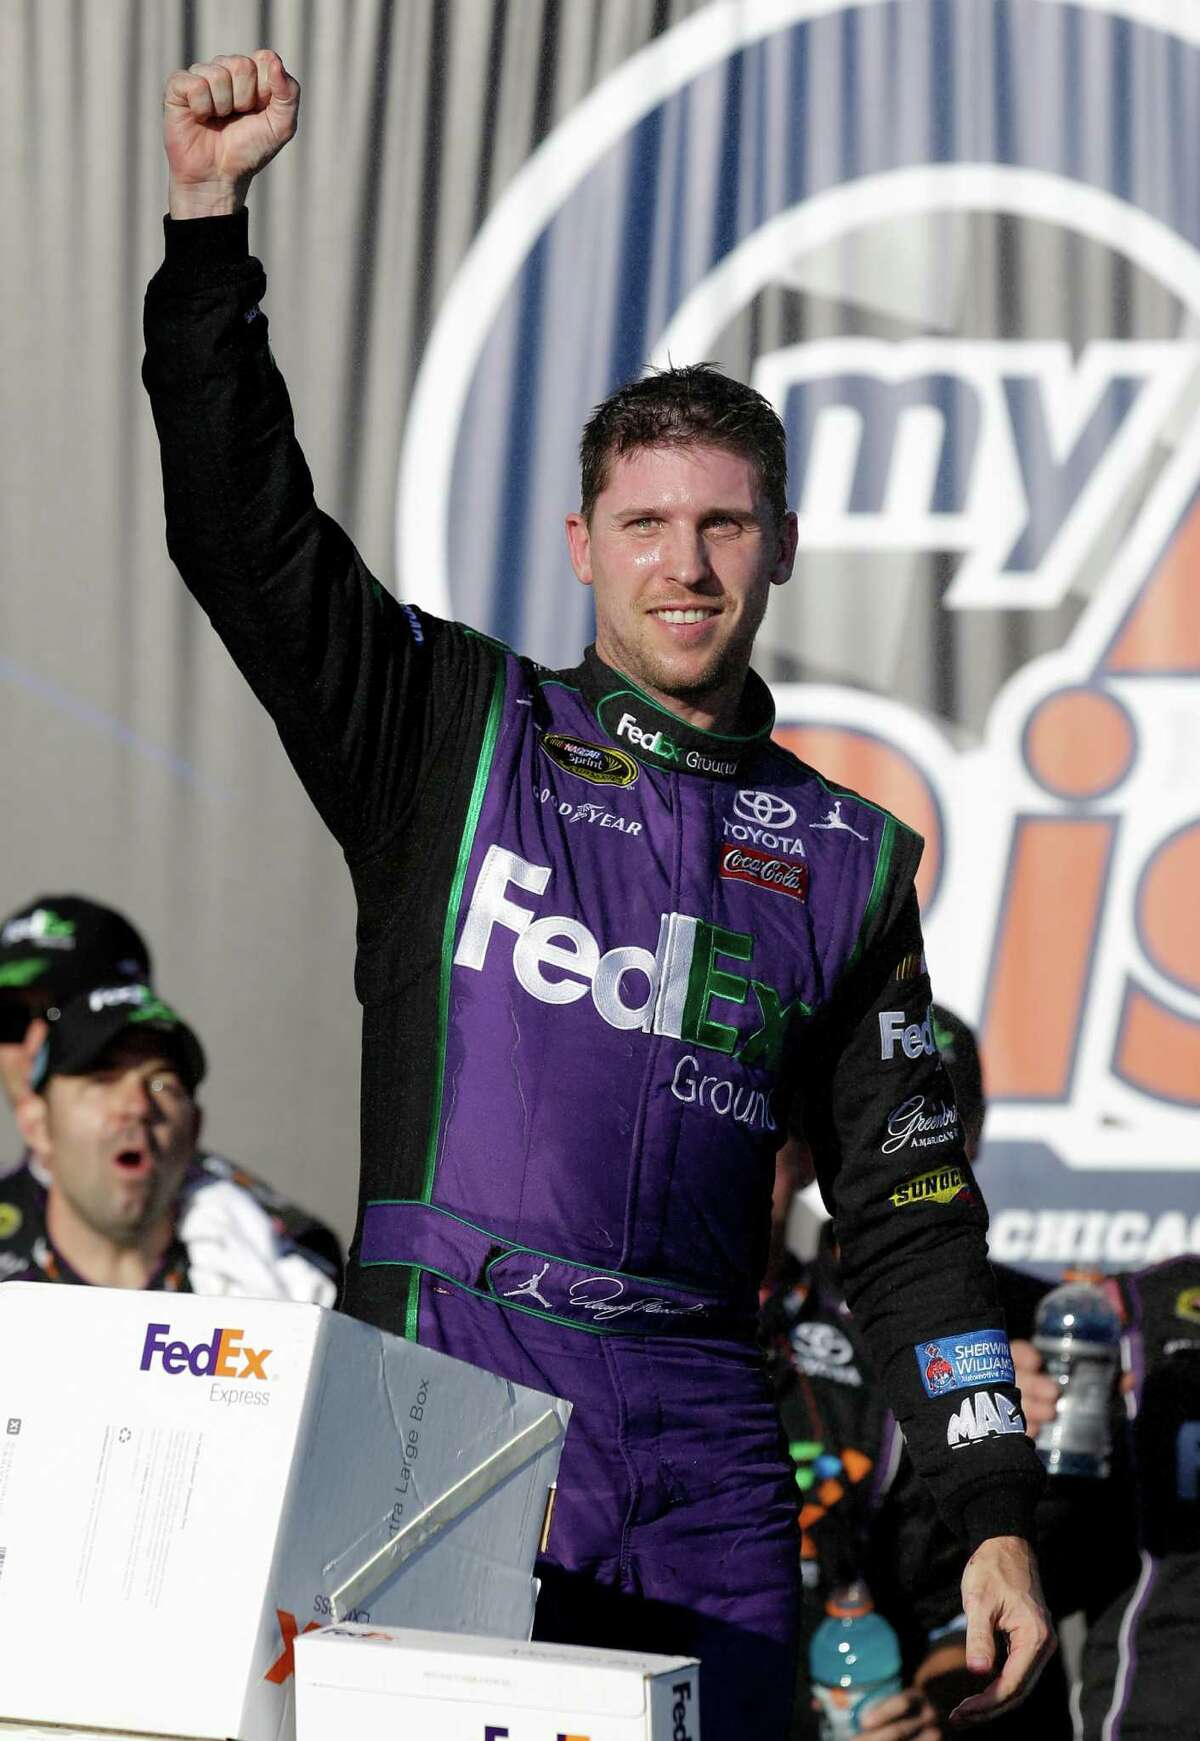 Denny Hamlin may not be getting around all that well off the track - he has a torn ACL from playing basketball last week - but he had the fastest car Sunday in the first race in the Chase.